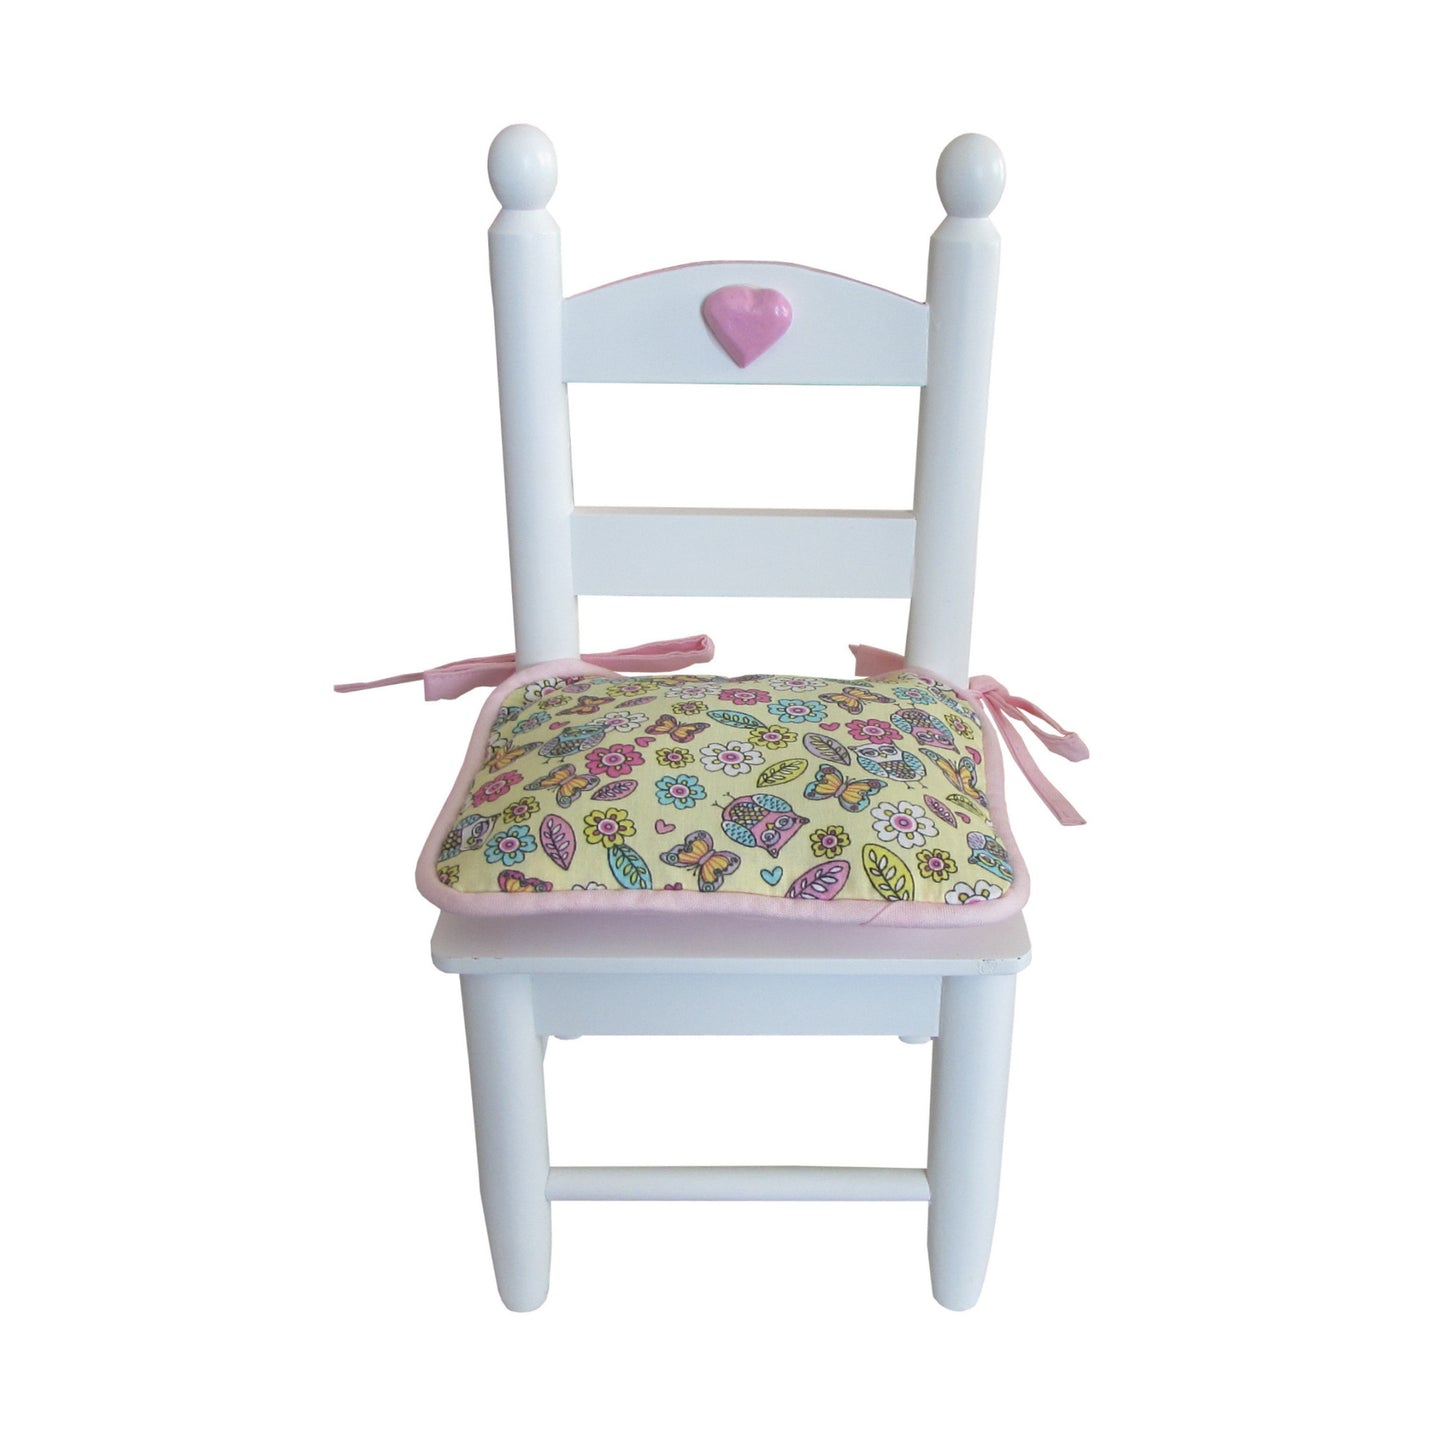 Owls and Flowers Print Doll Chair Cushion for 18-inch dolls